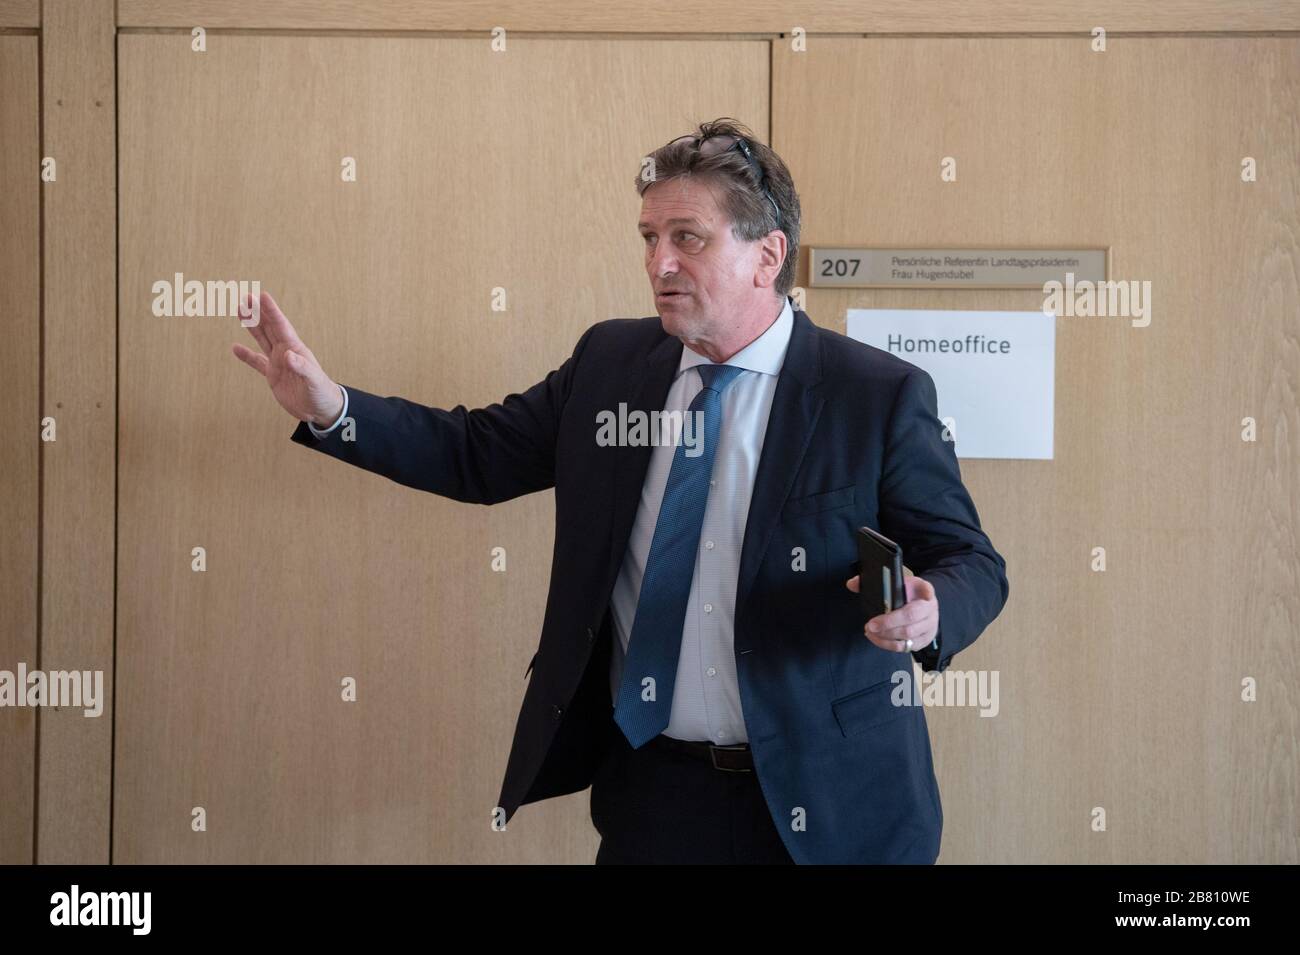 Stuttgart, Germany. 19th Mar, 2020. 19 March 2020, Baden-Wuerttemberg, Stuttgart: Manfred 'Manne' Lucha, Minister of Social Affairs of Baden-Württemberg, is standing in front of a plenary session of the state parliament of Baden-Württemberg in the foyer. The state parliament met for a special session to set the course for the fight against the coronavirus. During the session, the members of parliament should keep the recommended distance of 1.5 to 2 metres so that they do not infect each other in case a politician should be infected with the virus. Some Members should therefore take their seat Stock Photo